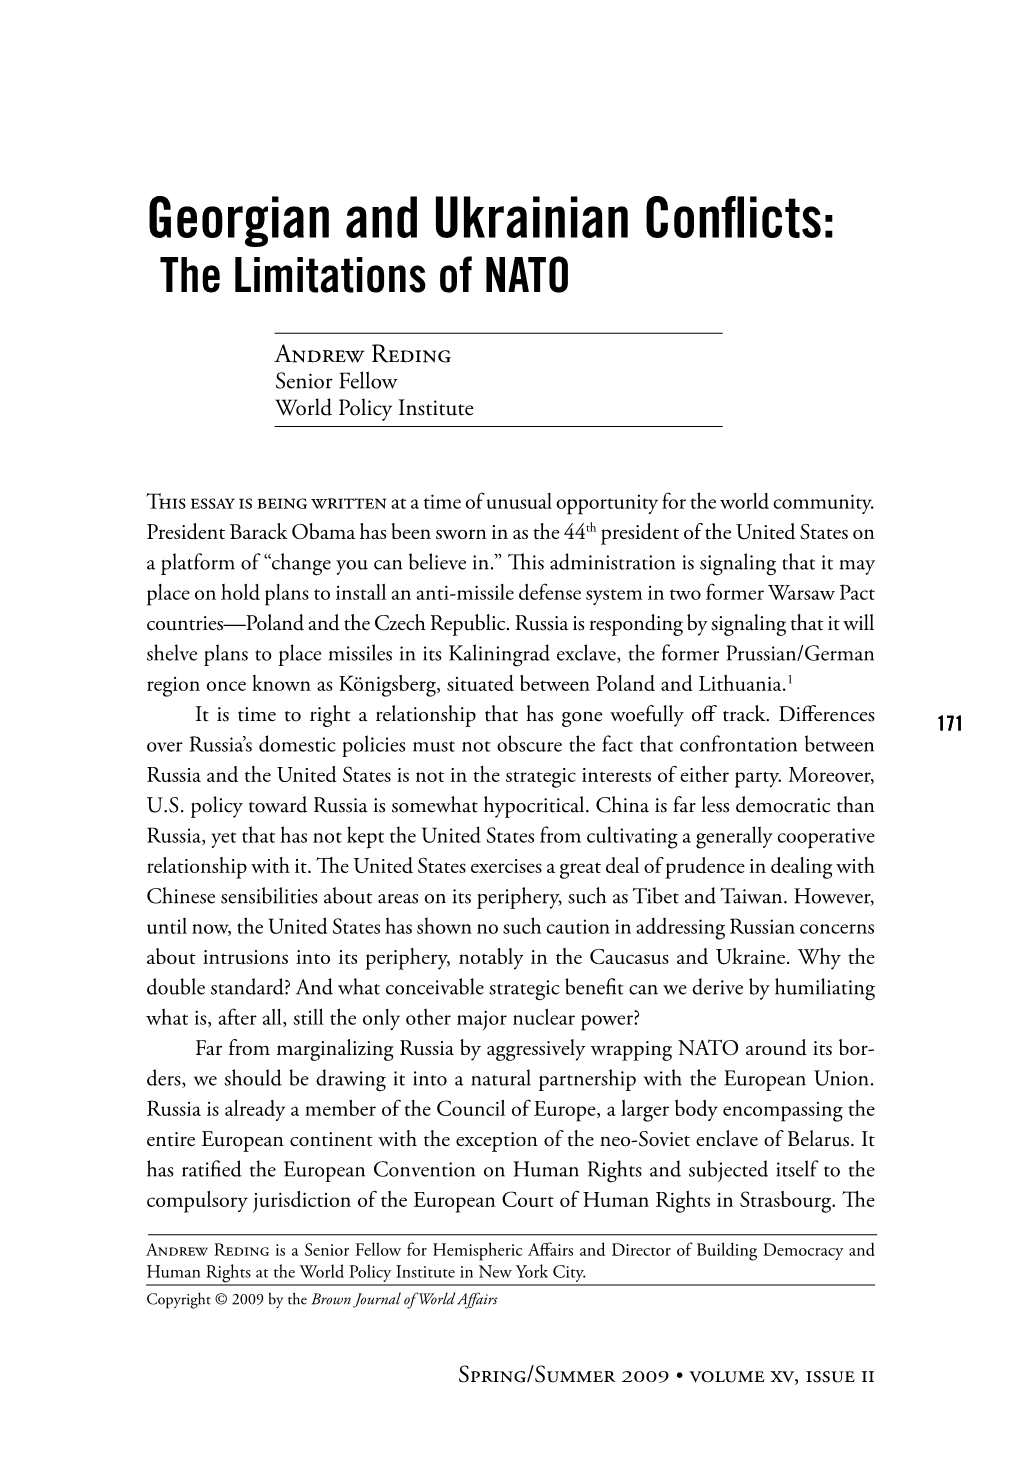 Georgian and Ukrainian Conflicts: the Limitations of NATO